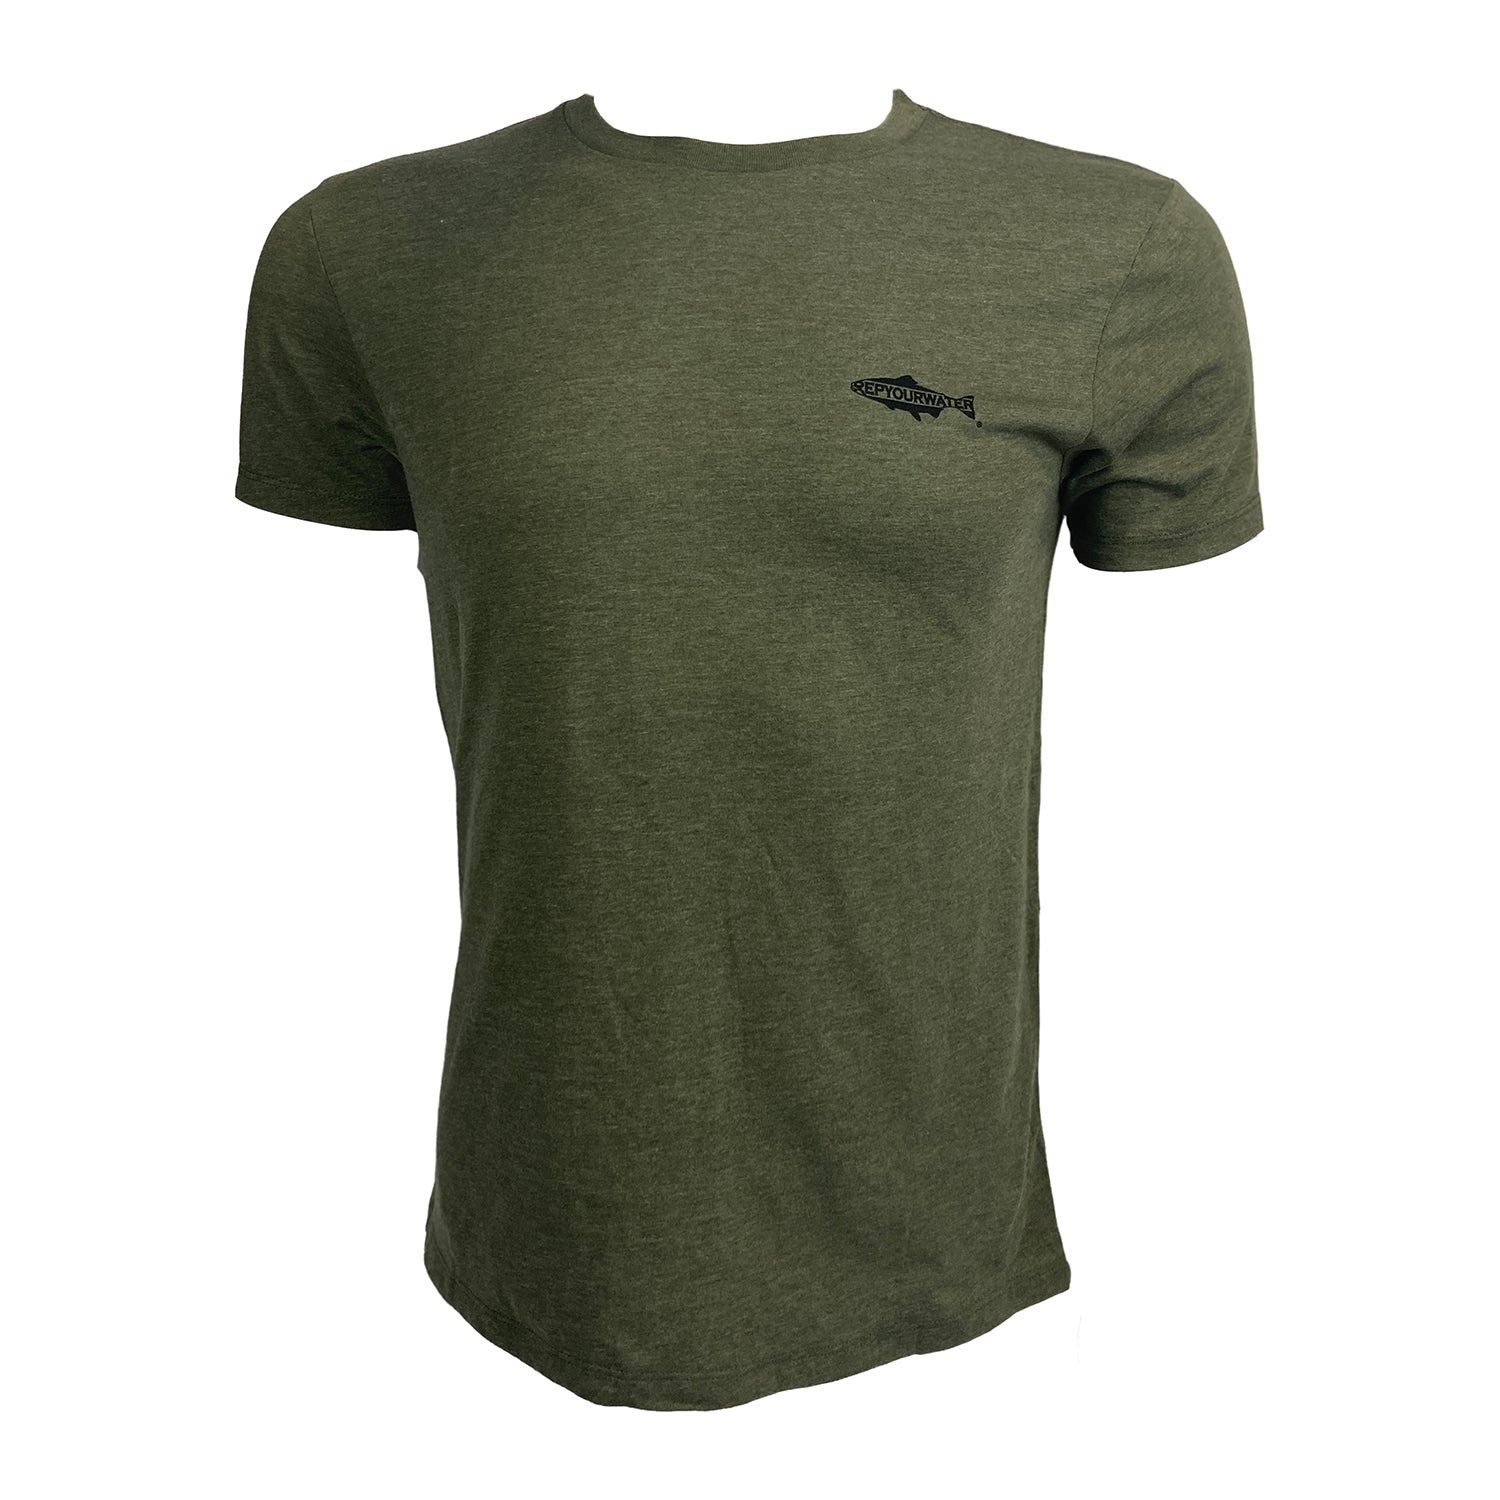 Green tee shown from the front with Rep Your Water logo on wearer's left chest.